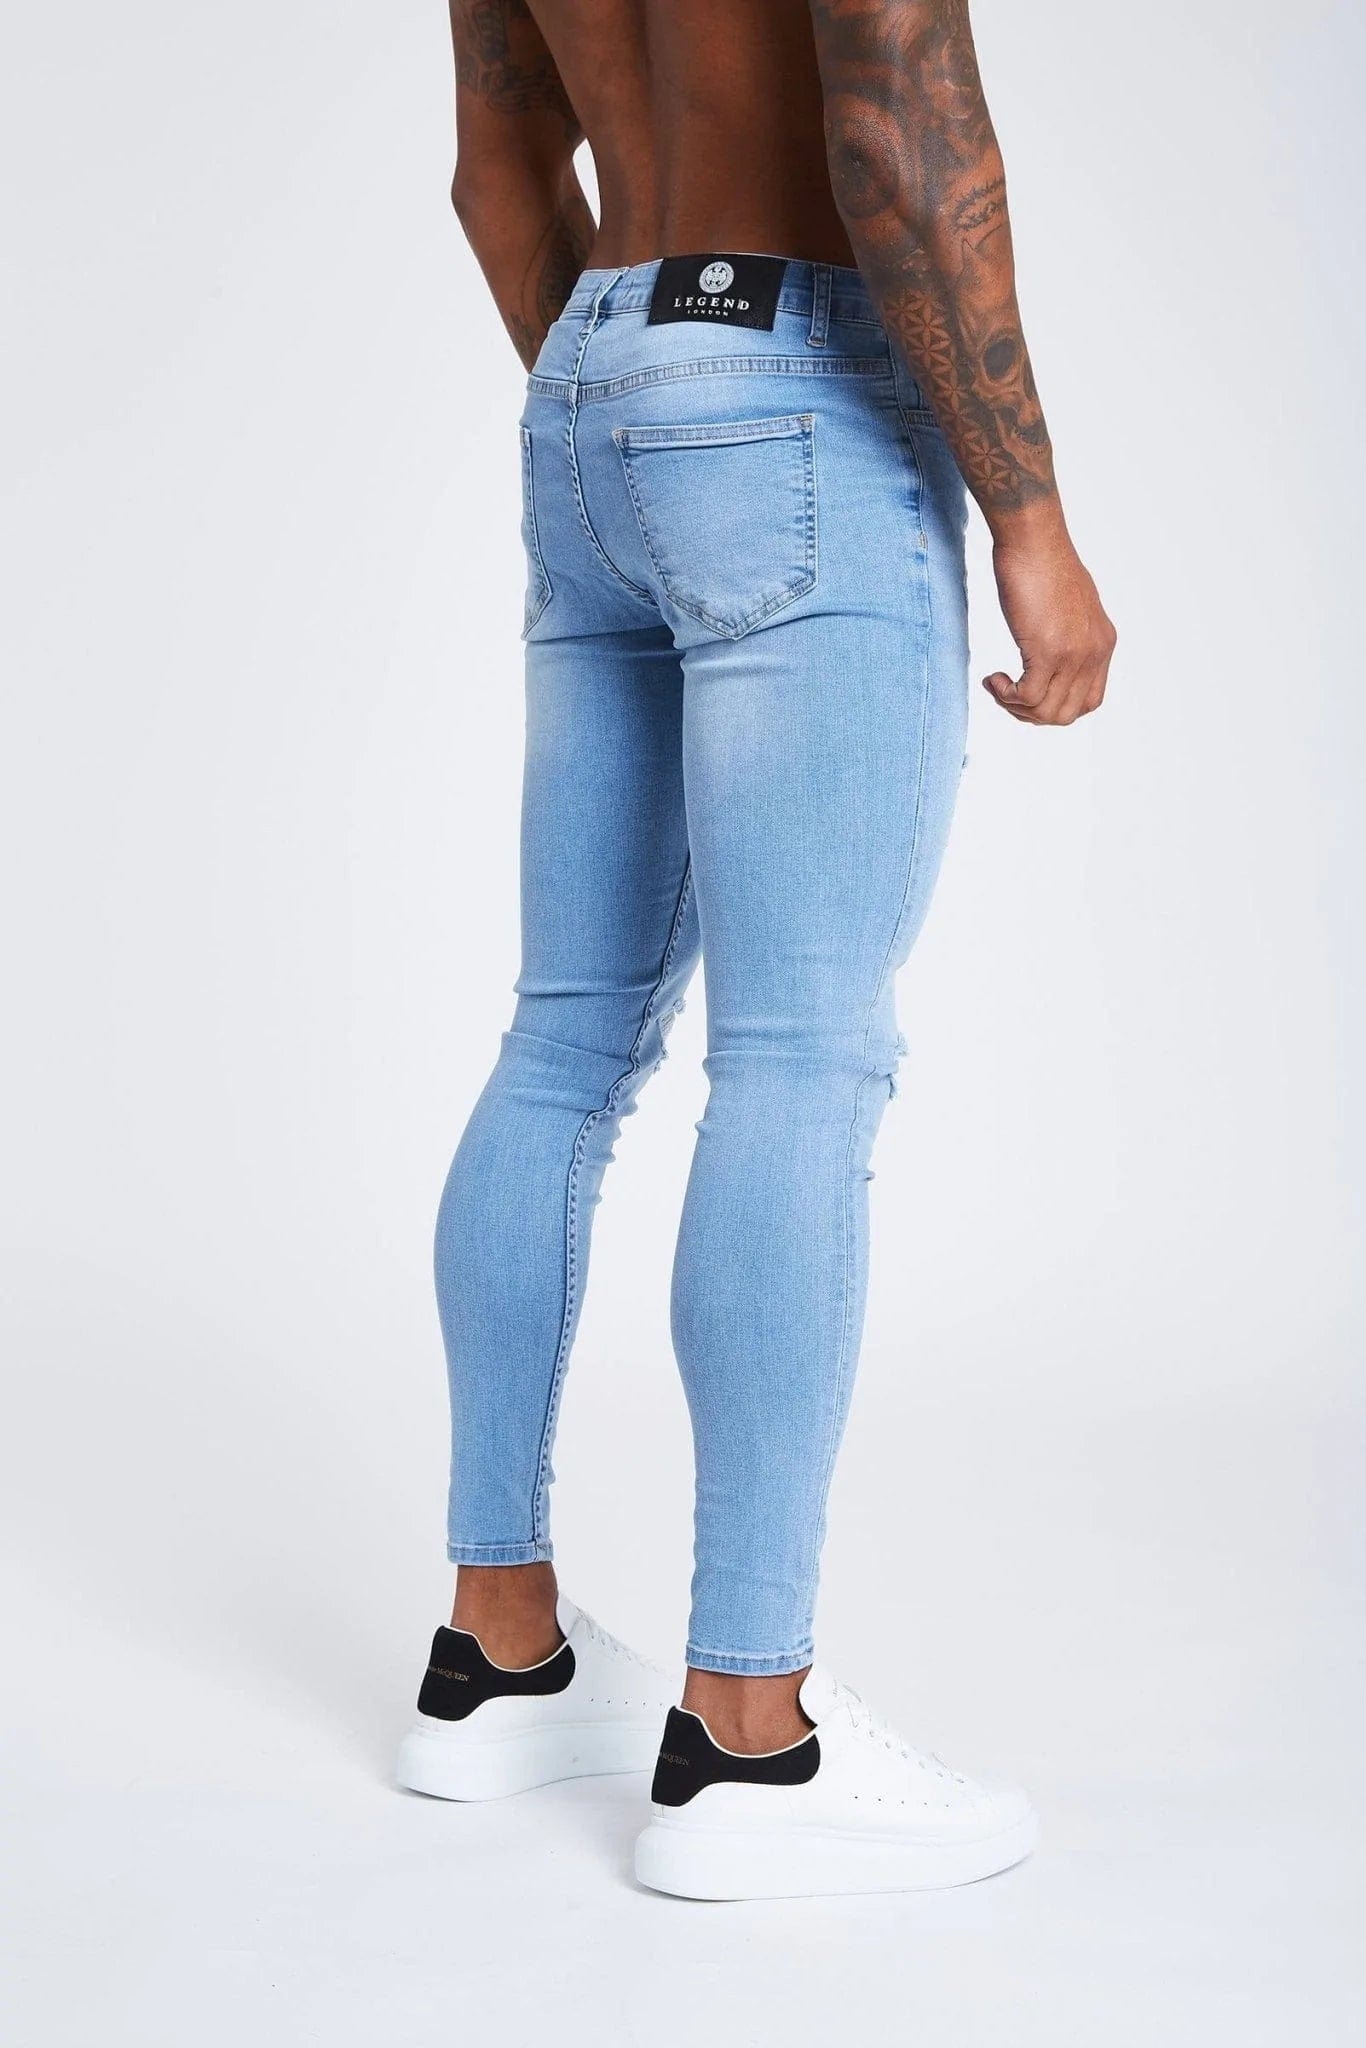 LIGHT BLUE JEANS - RIPPED AND REPAIRED – Legend London